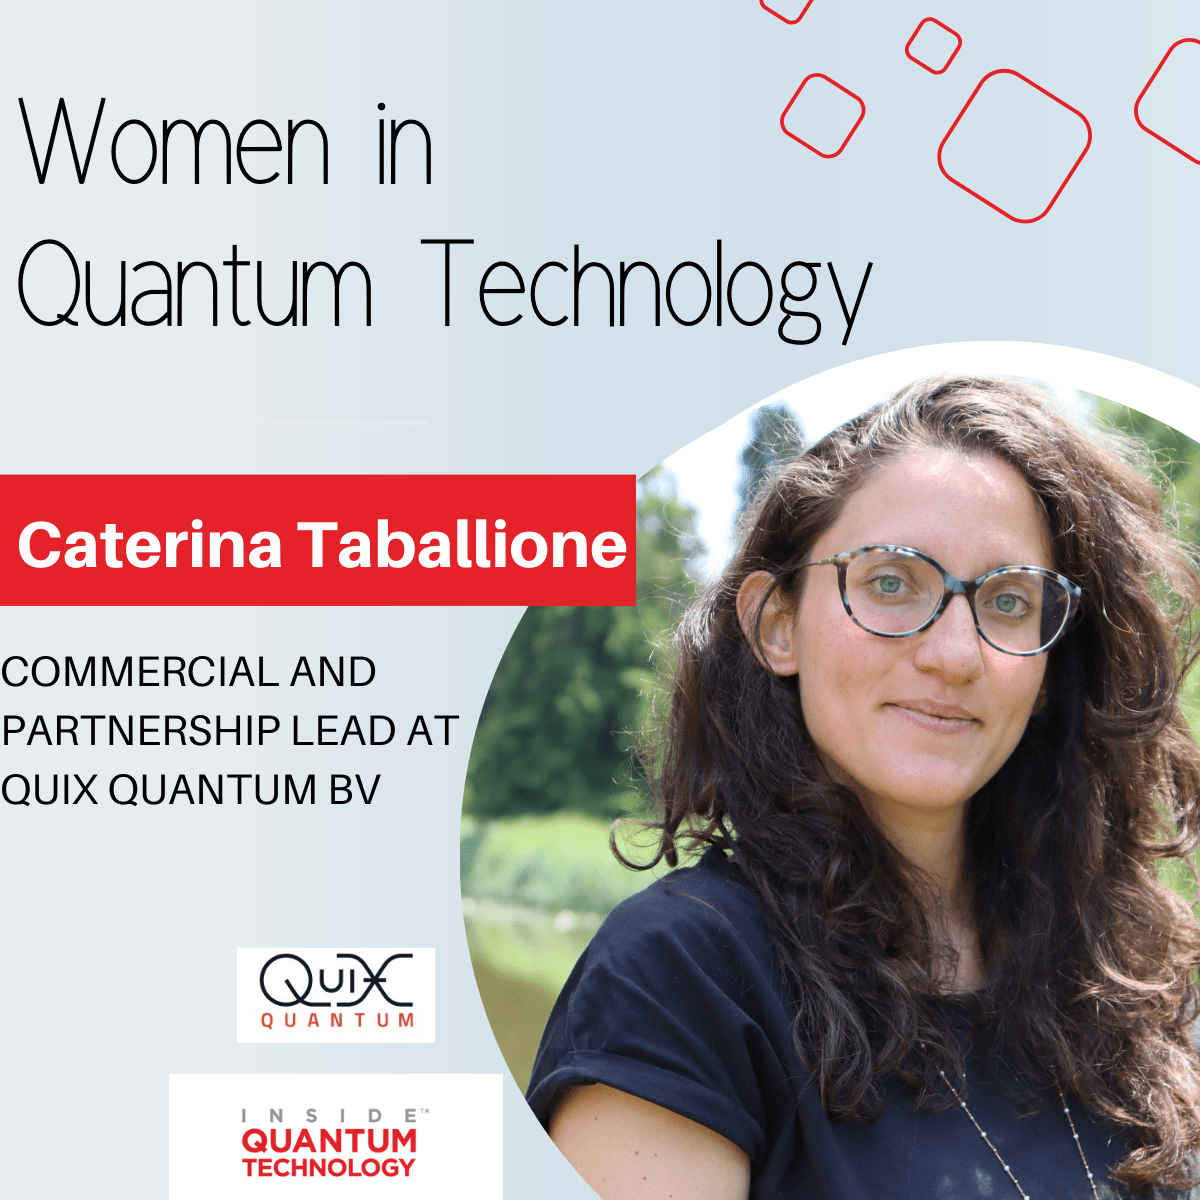 Caterina Taballione, an employee at QuiX Quantum, tells her journey into becoming a female leader in the quantum industry.